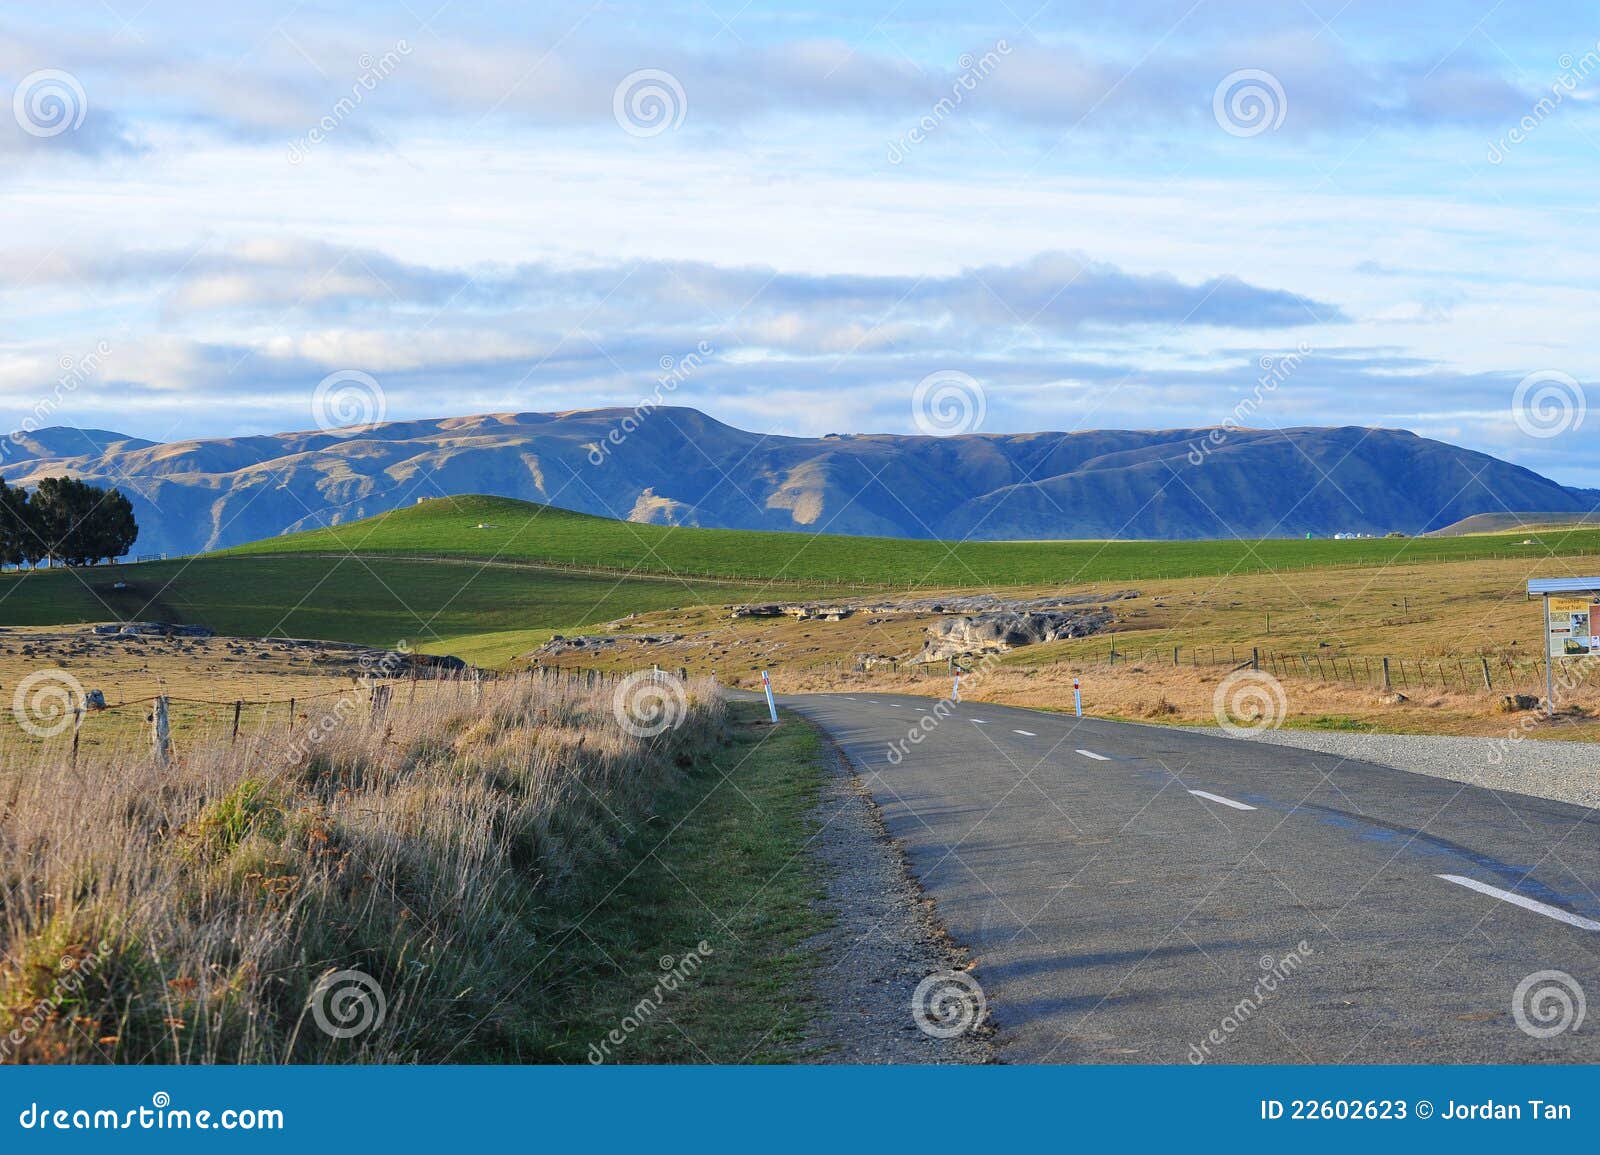 Scenic road of New Zealand South Island.